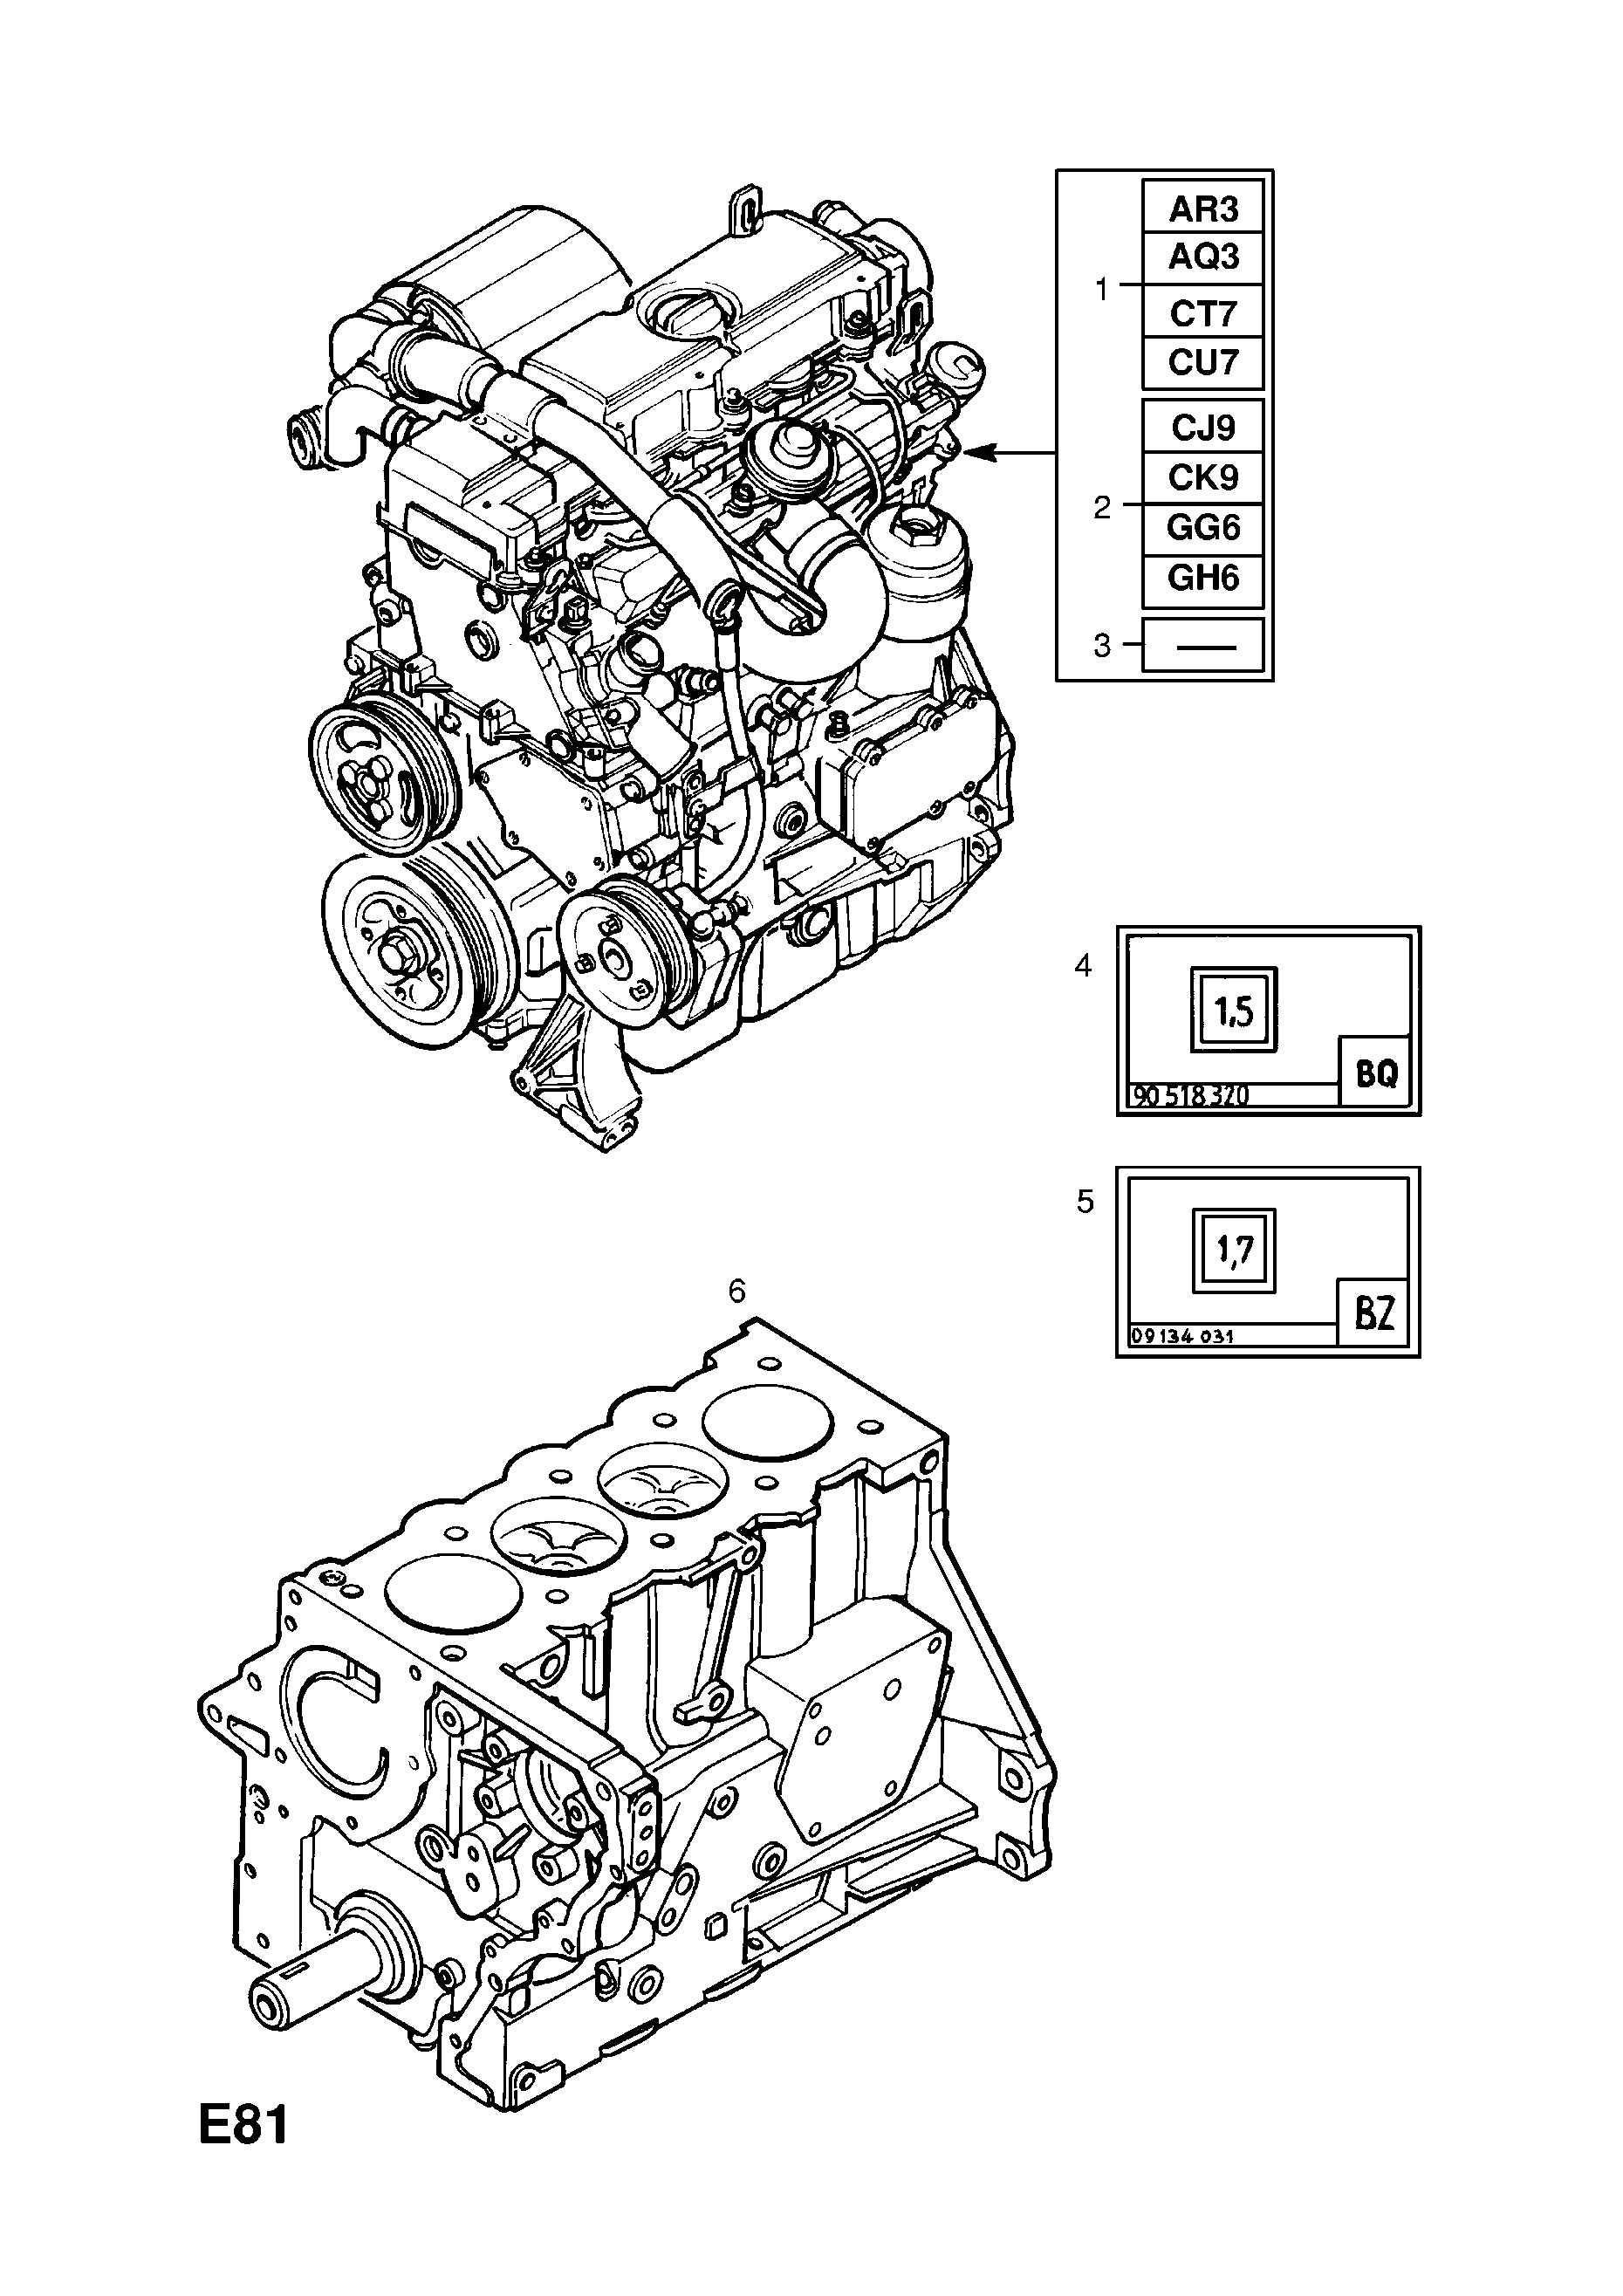 ENGINE ASSEMBLY (EXCHANGE) <small><i>[FOR VAUXHALL Y22DTH[LL9] ENGINE]</i></small>